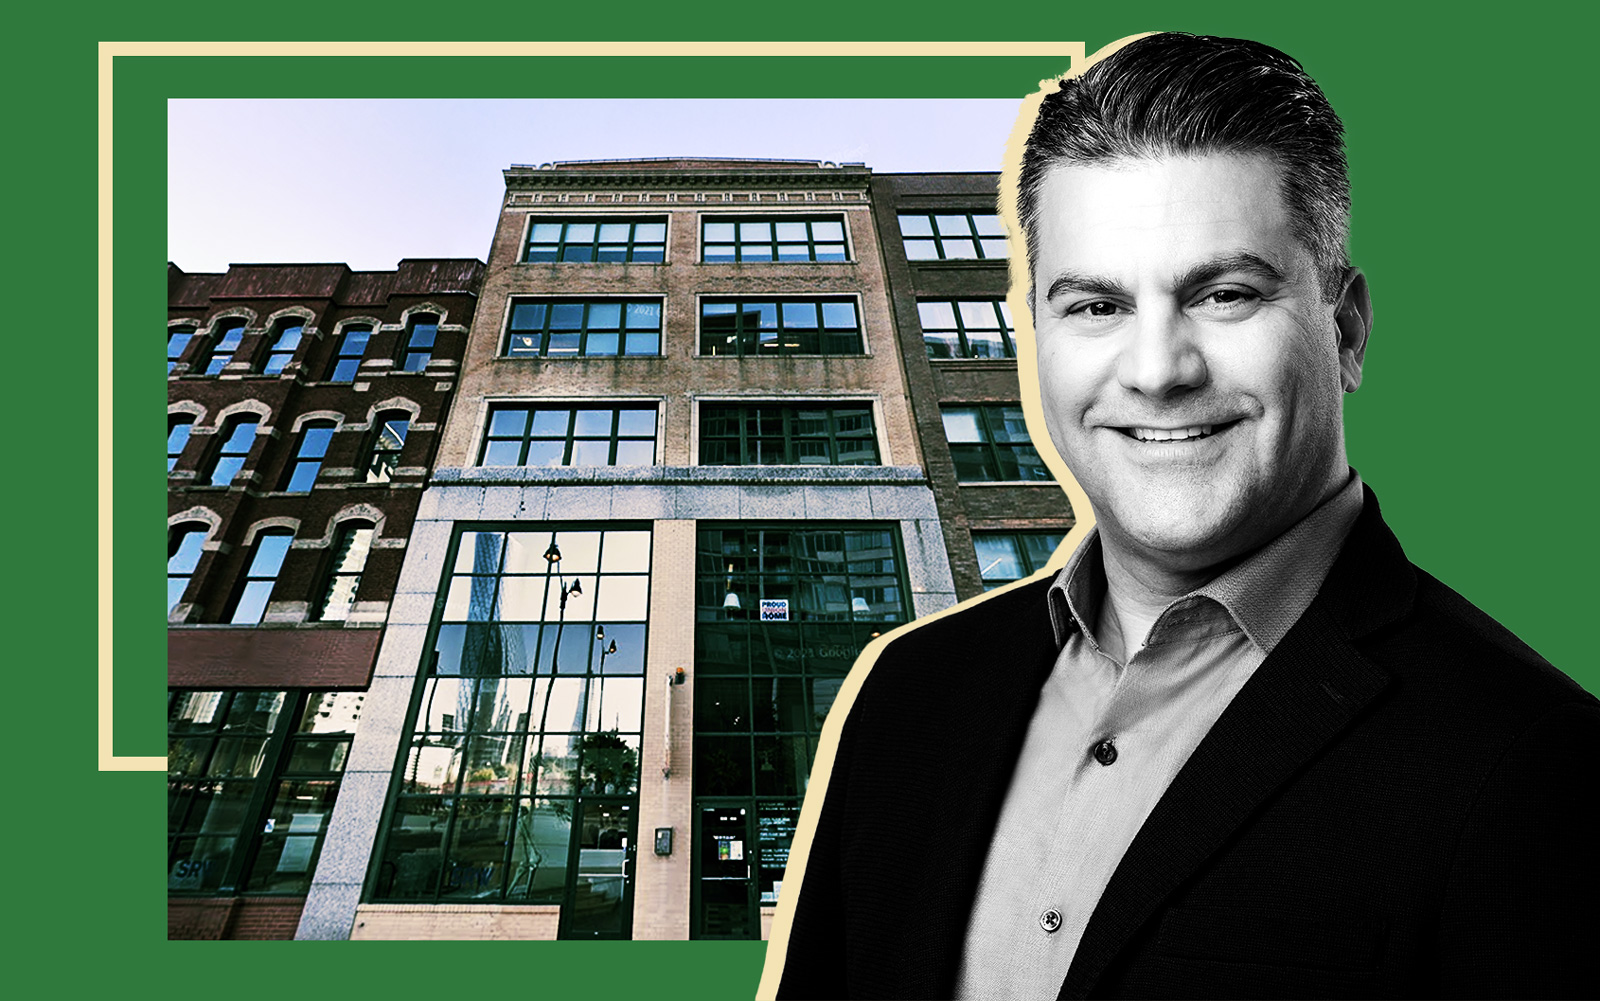 Beltone ditches Glenview for smaller West Loop digs